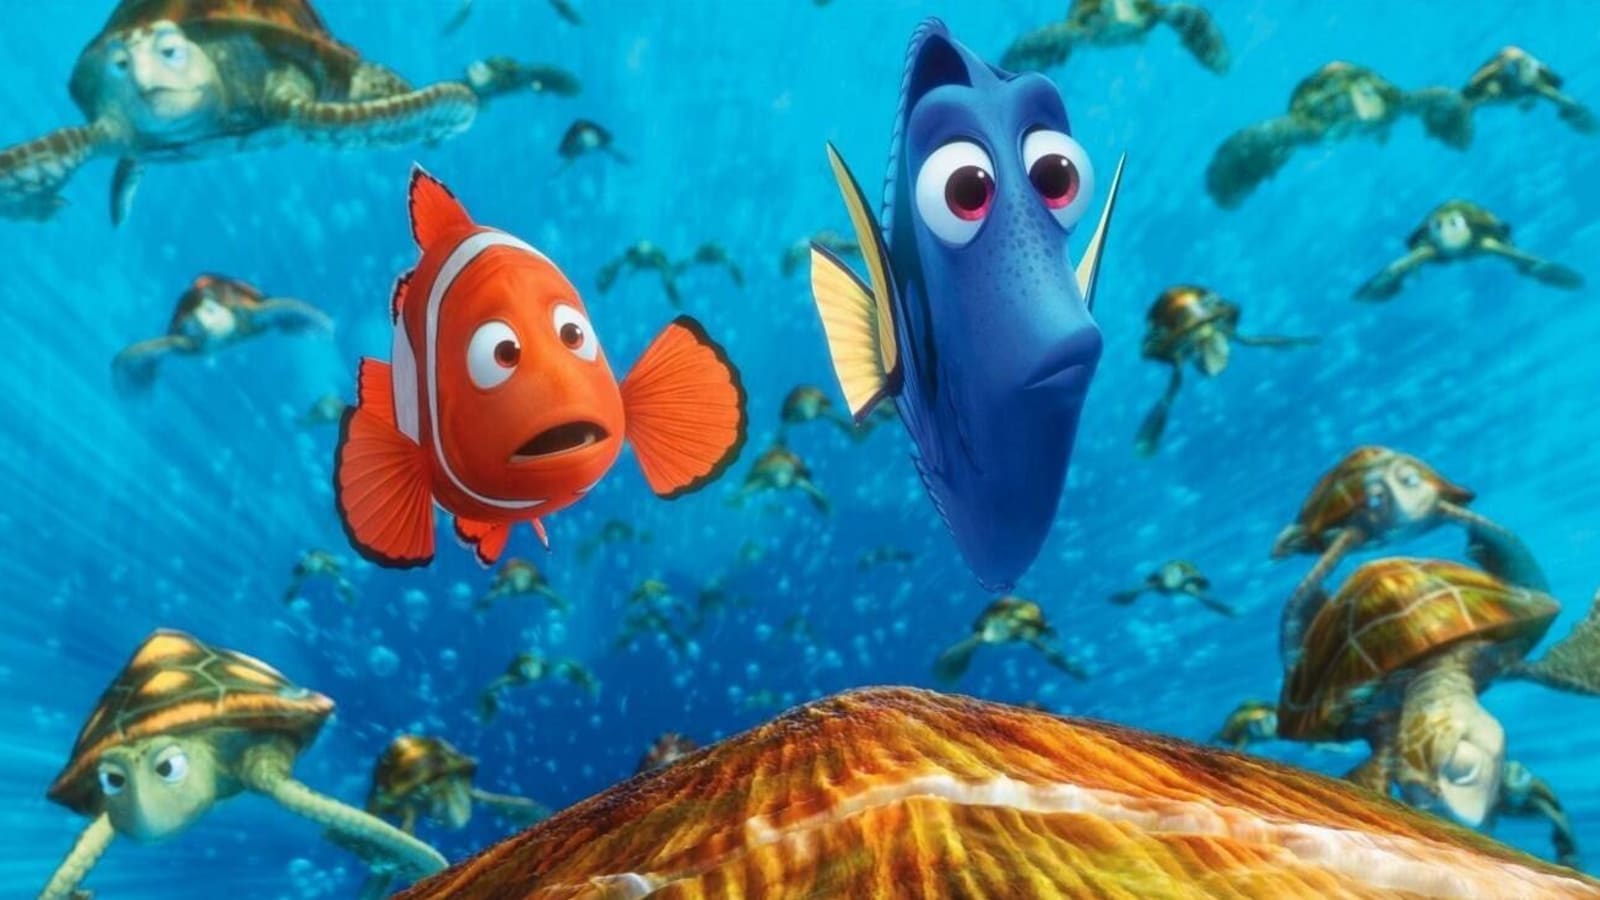 20 facts you might not know about 'Finding Nemo'